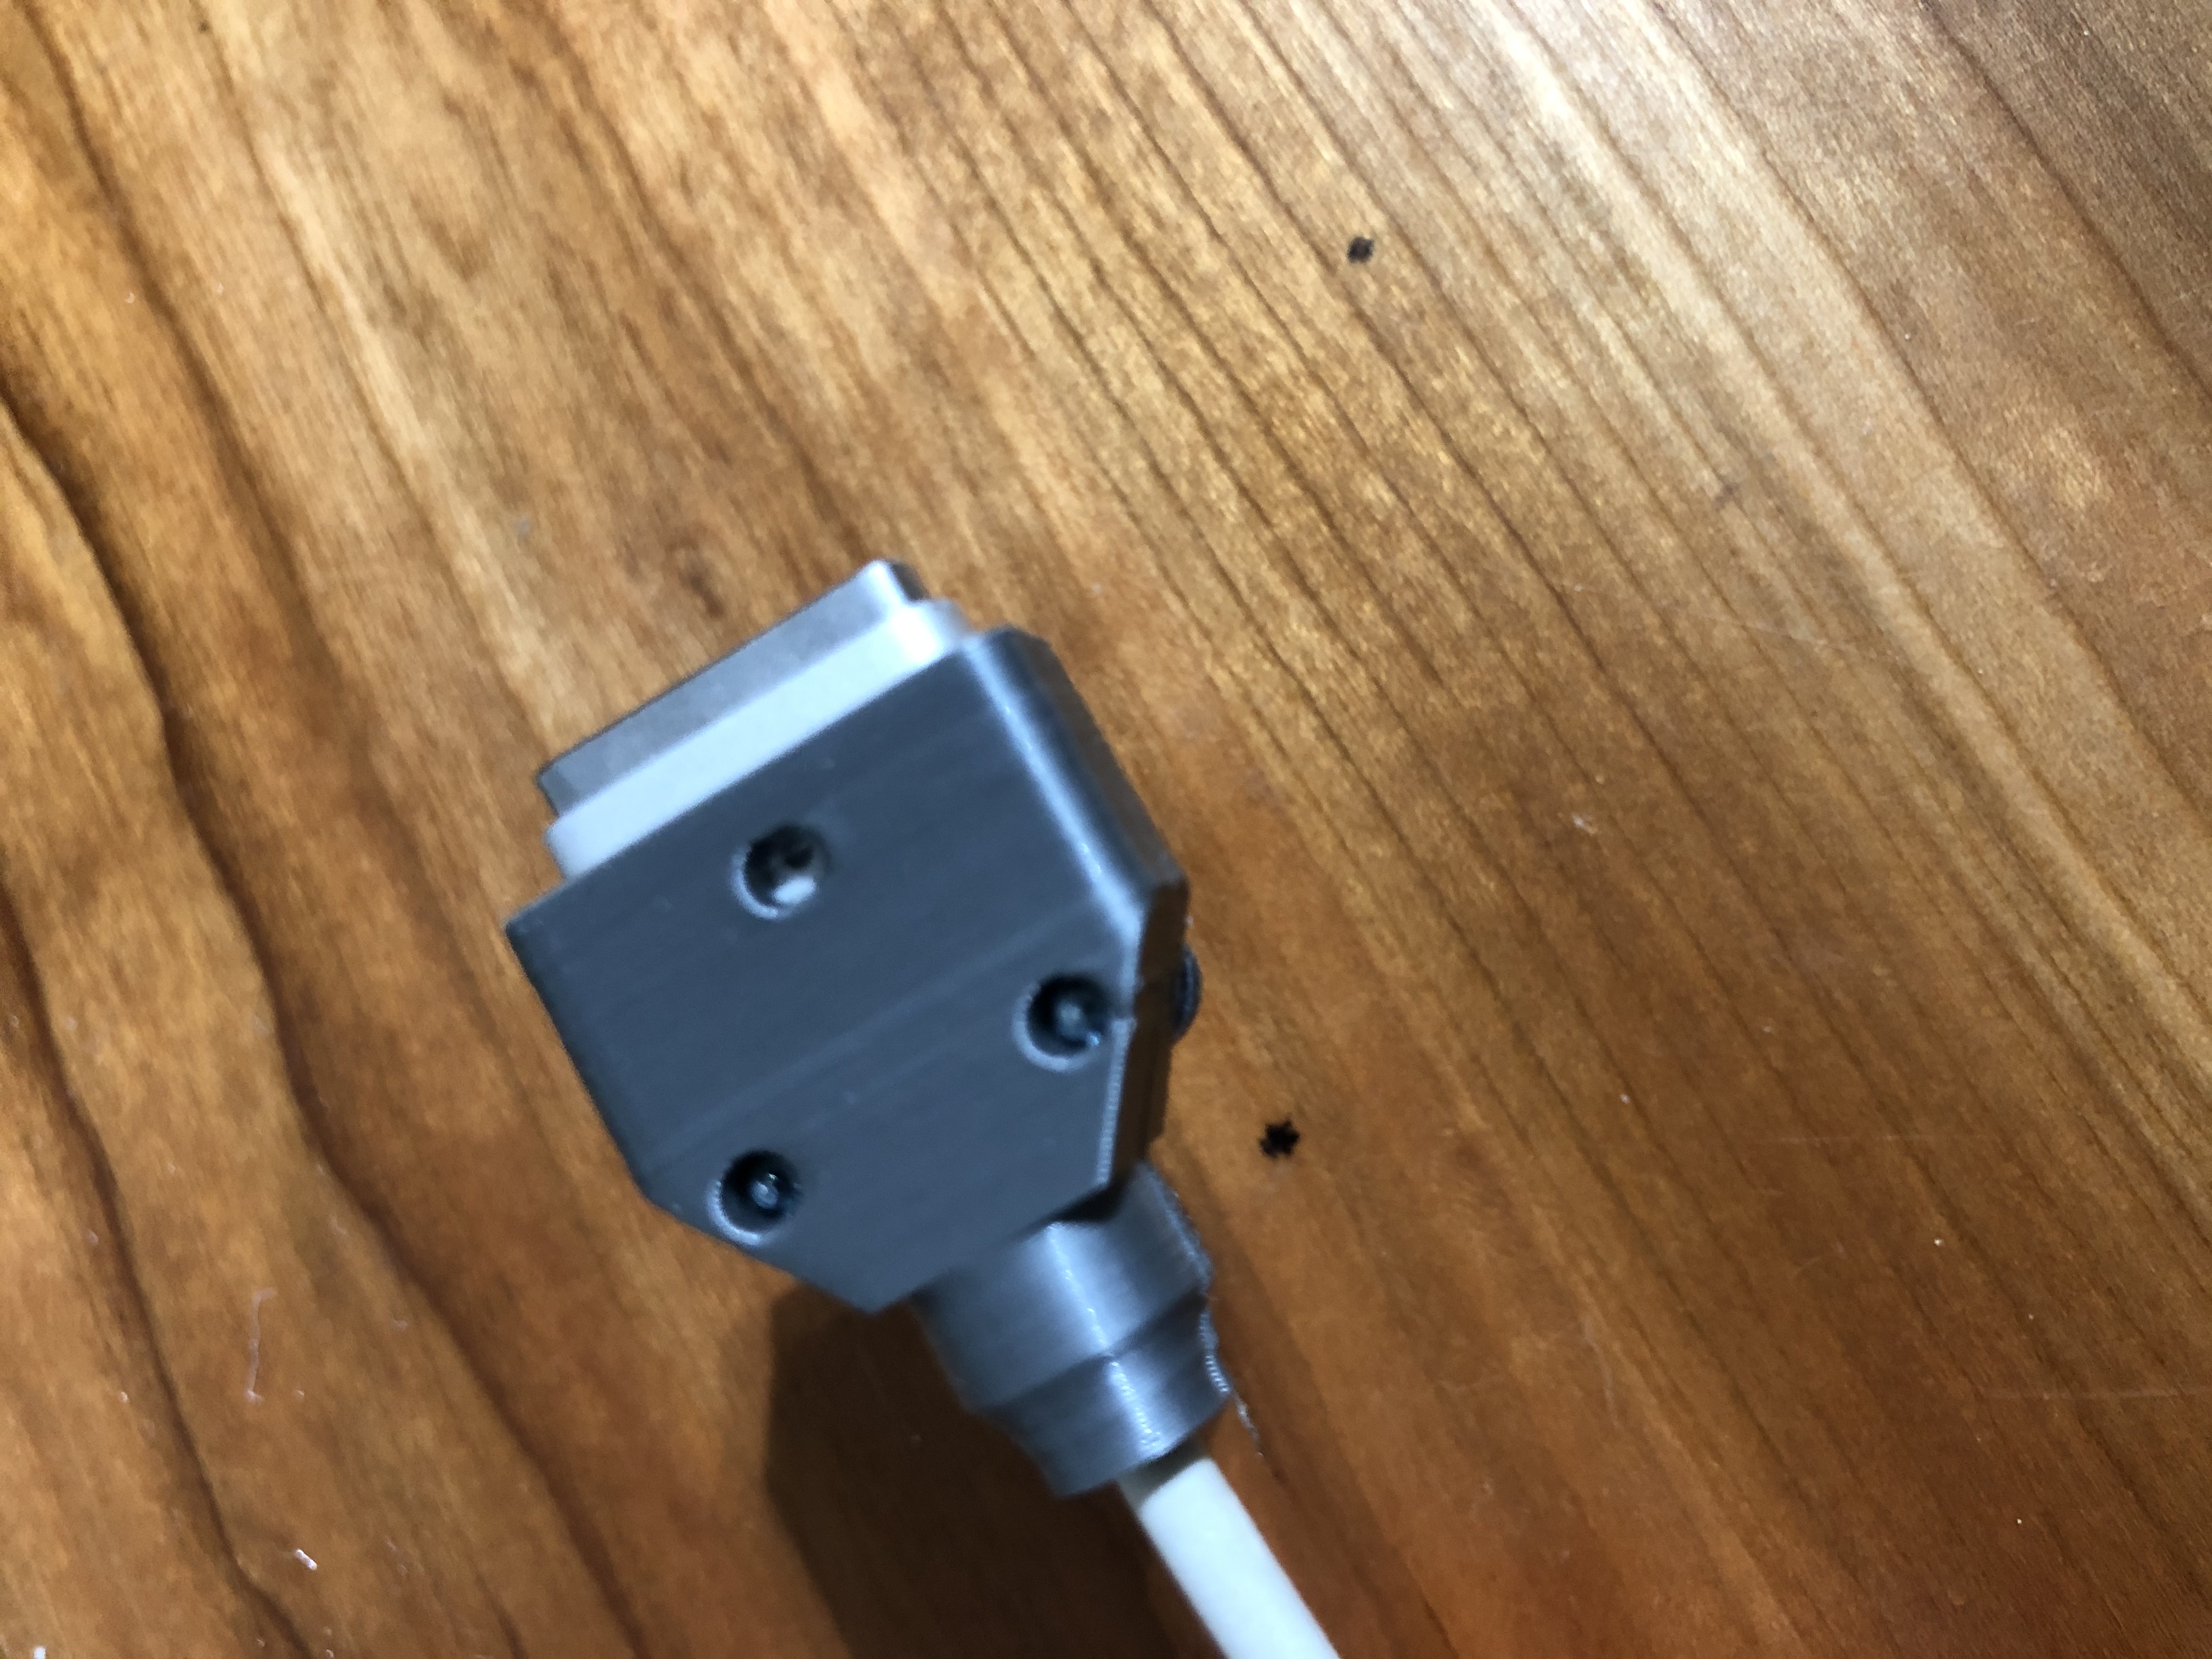 Mac Book Charging Cable Protector